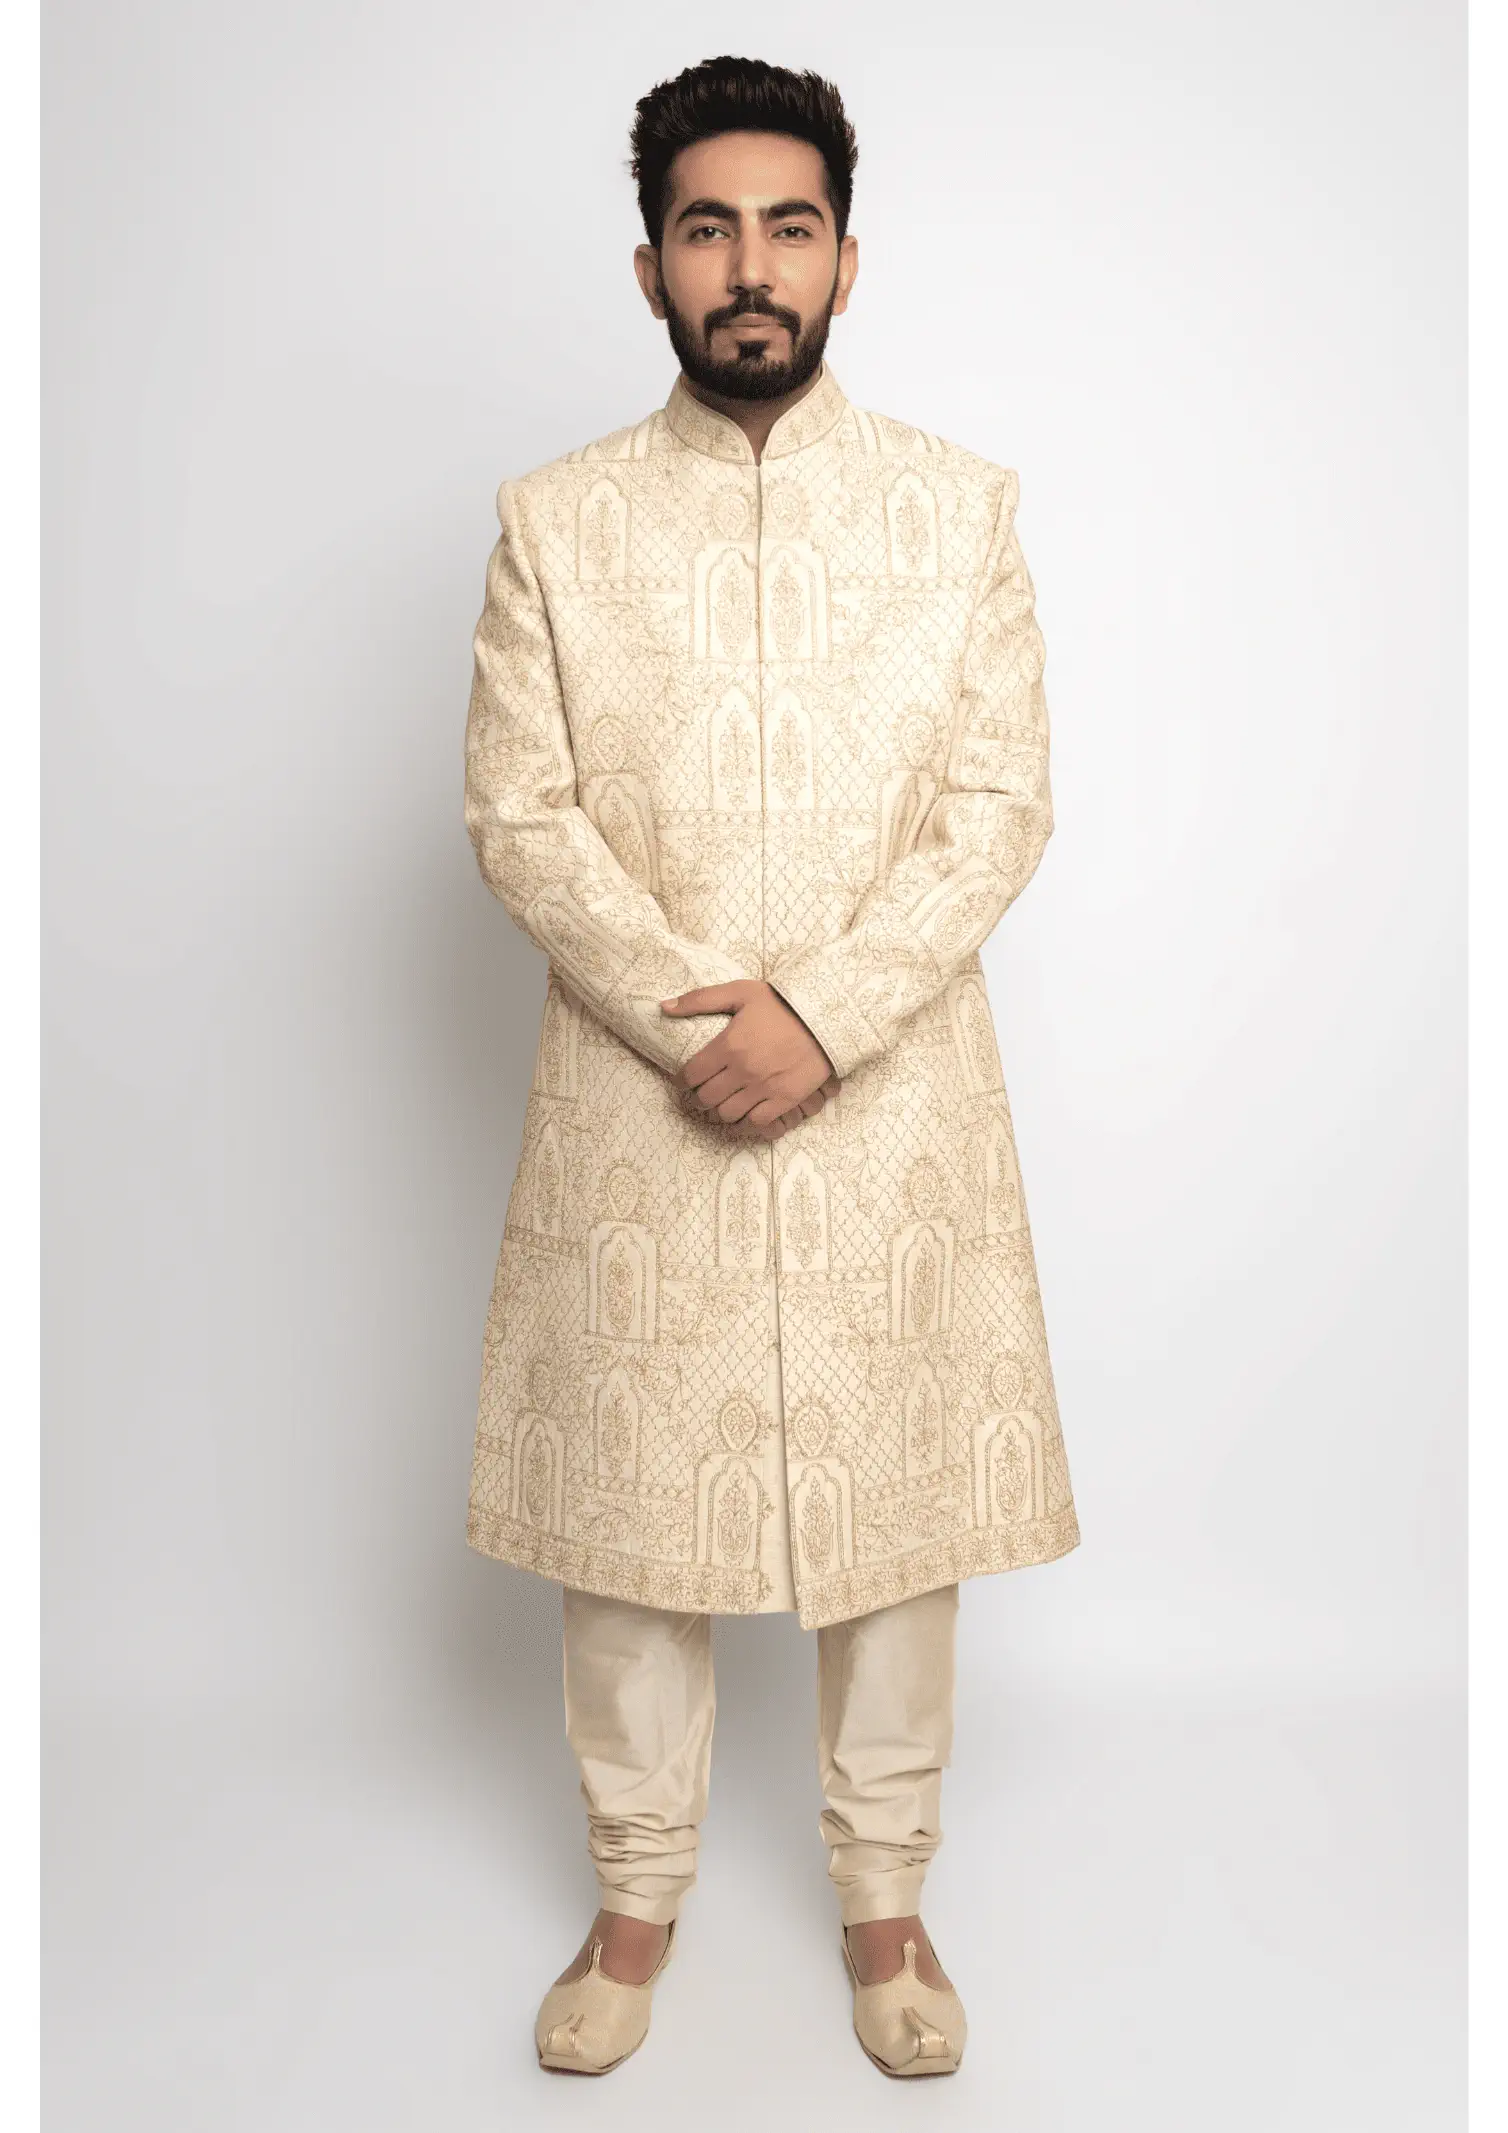 Off White Achkan style with Intricate Gold Embroidery